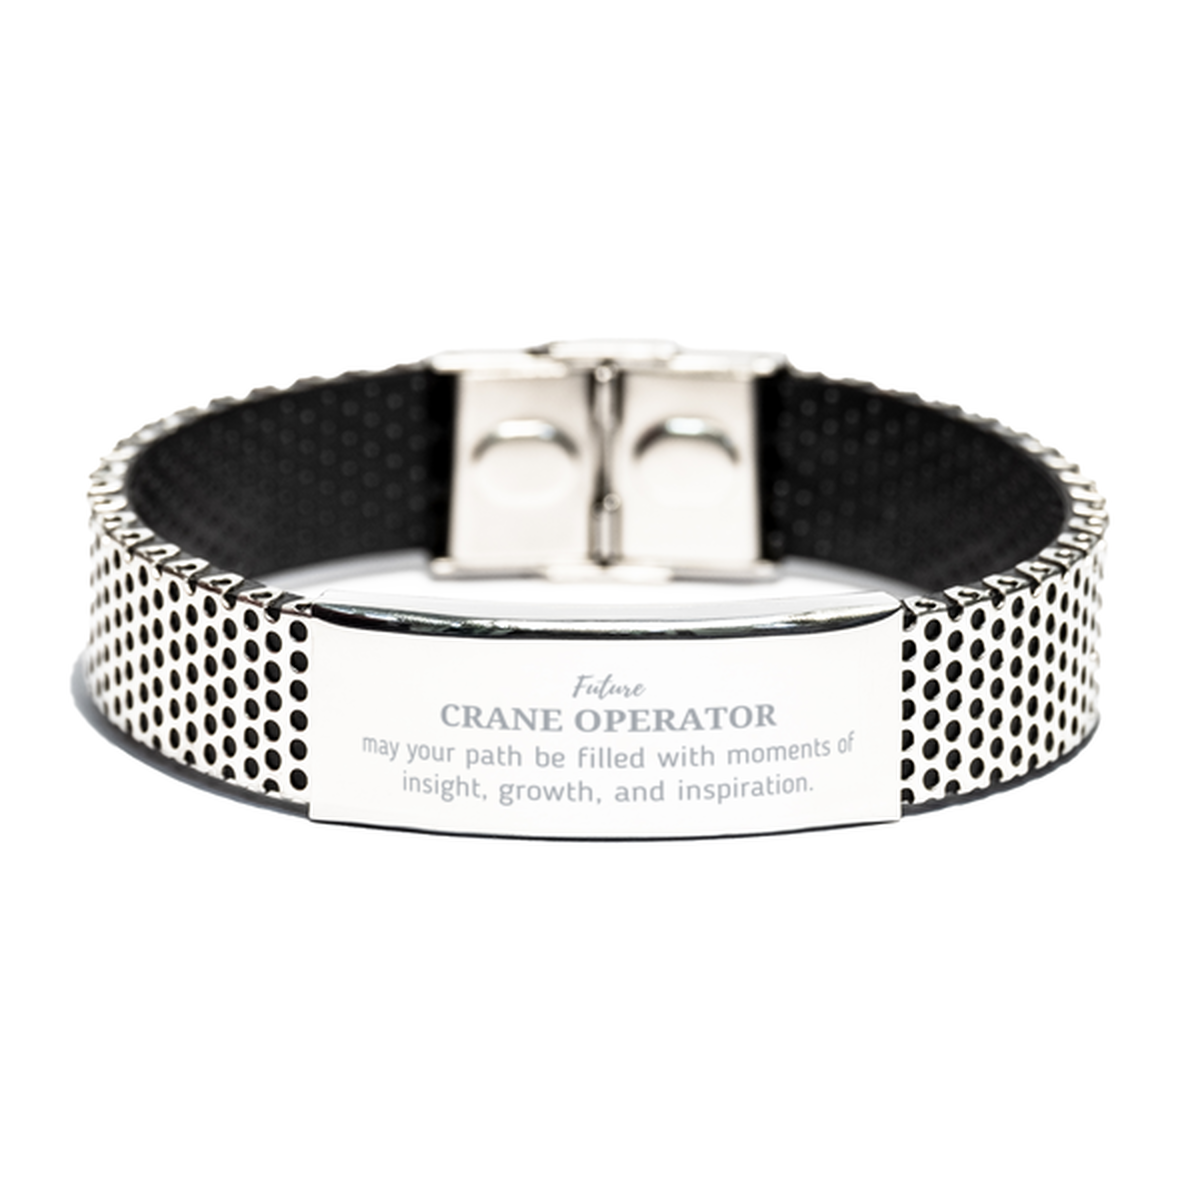 Future Crane Operator Gifts, May your path be filled with moments of insight, Graduation Gifts for New Crane Operator, Christmas Unique Stainless Steel Bracelet For Men, Women, Friends